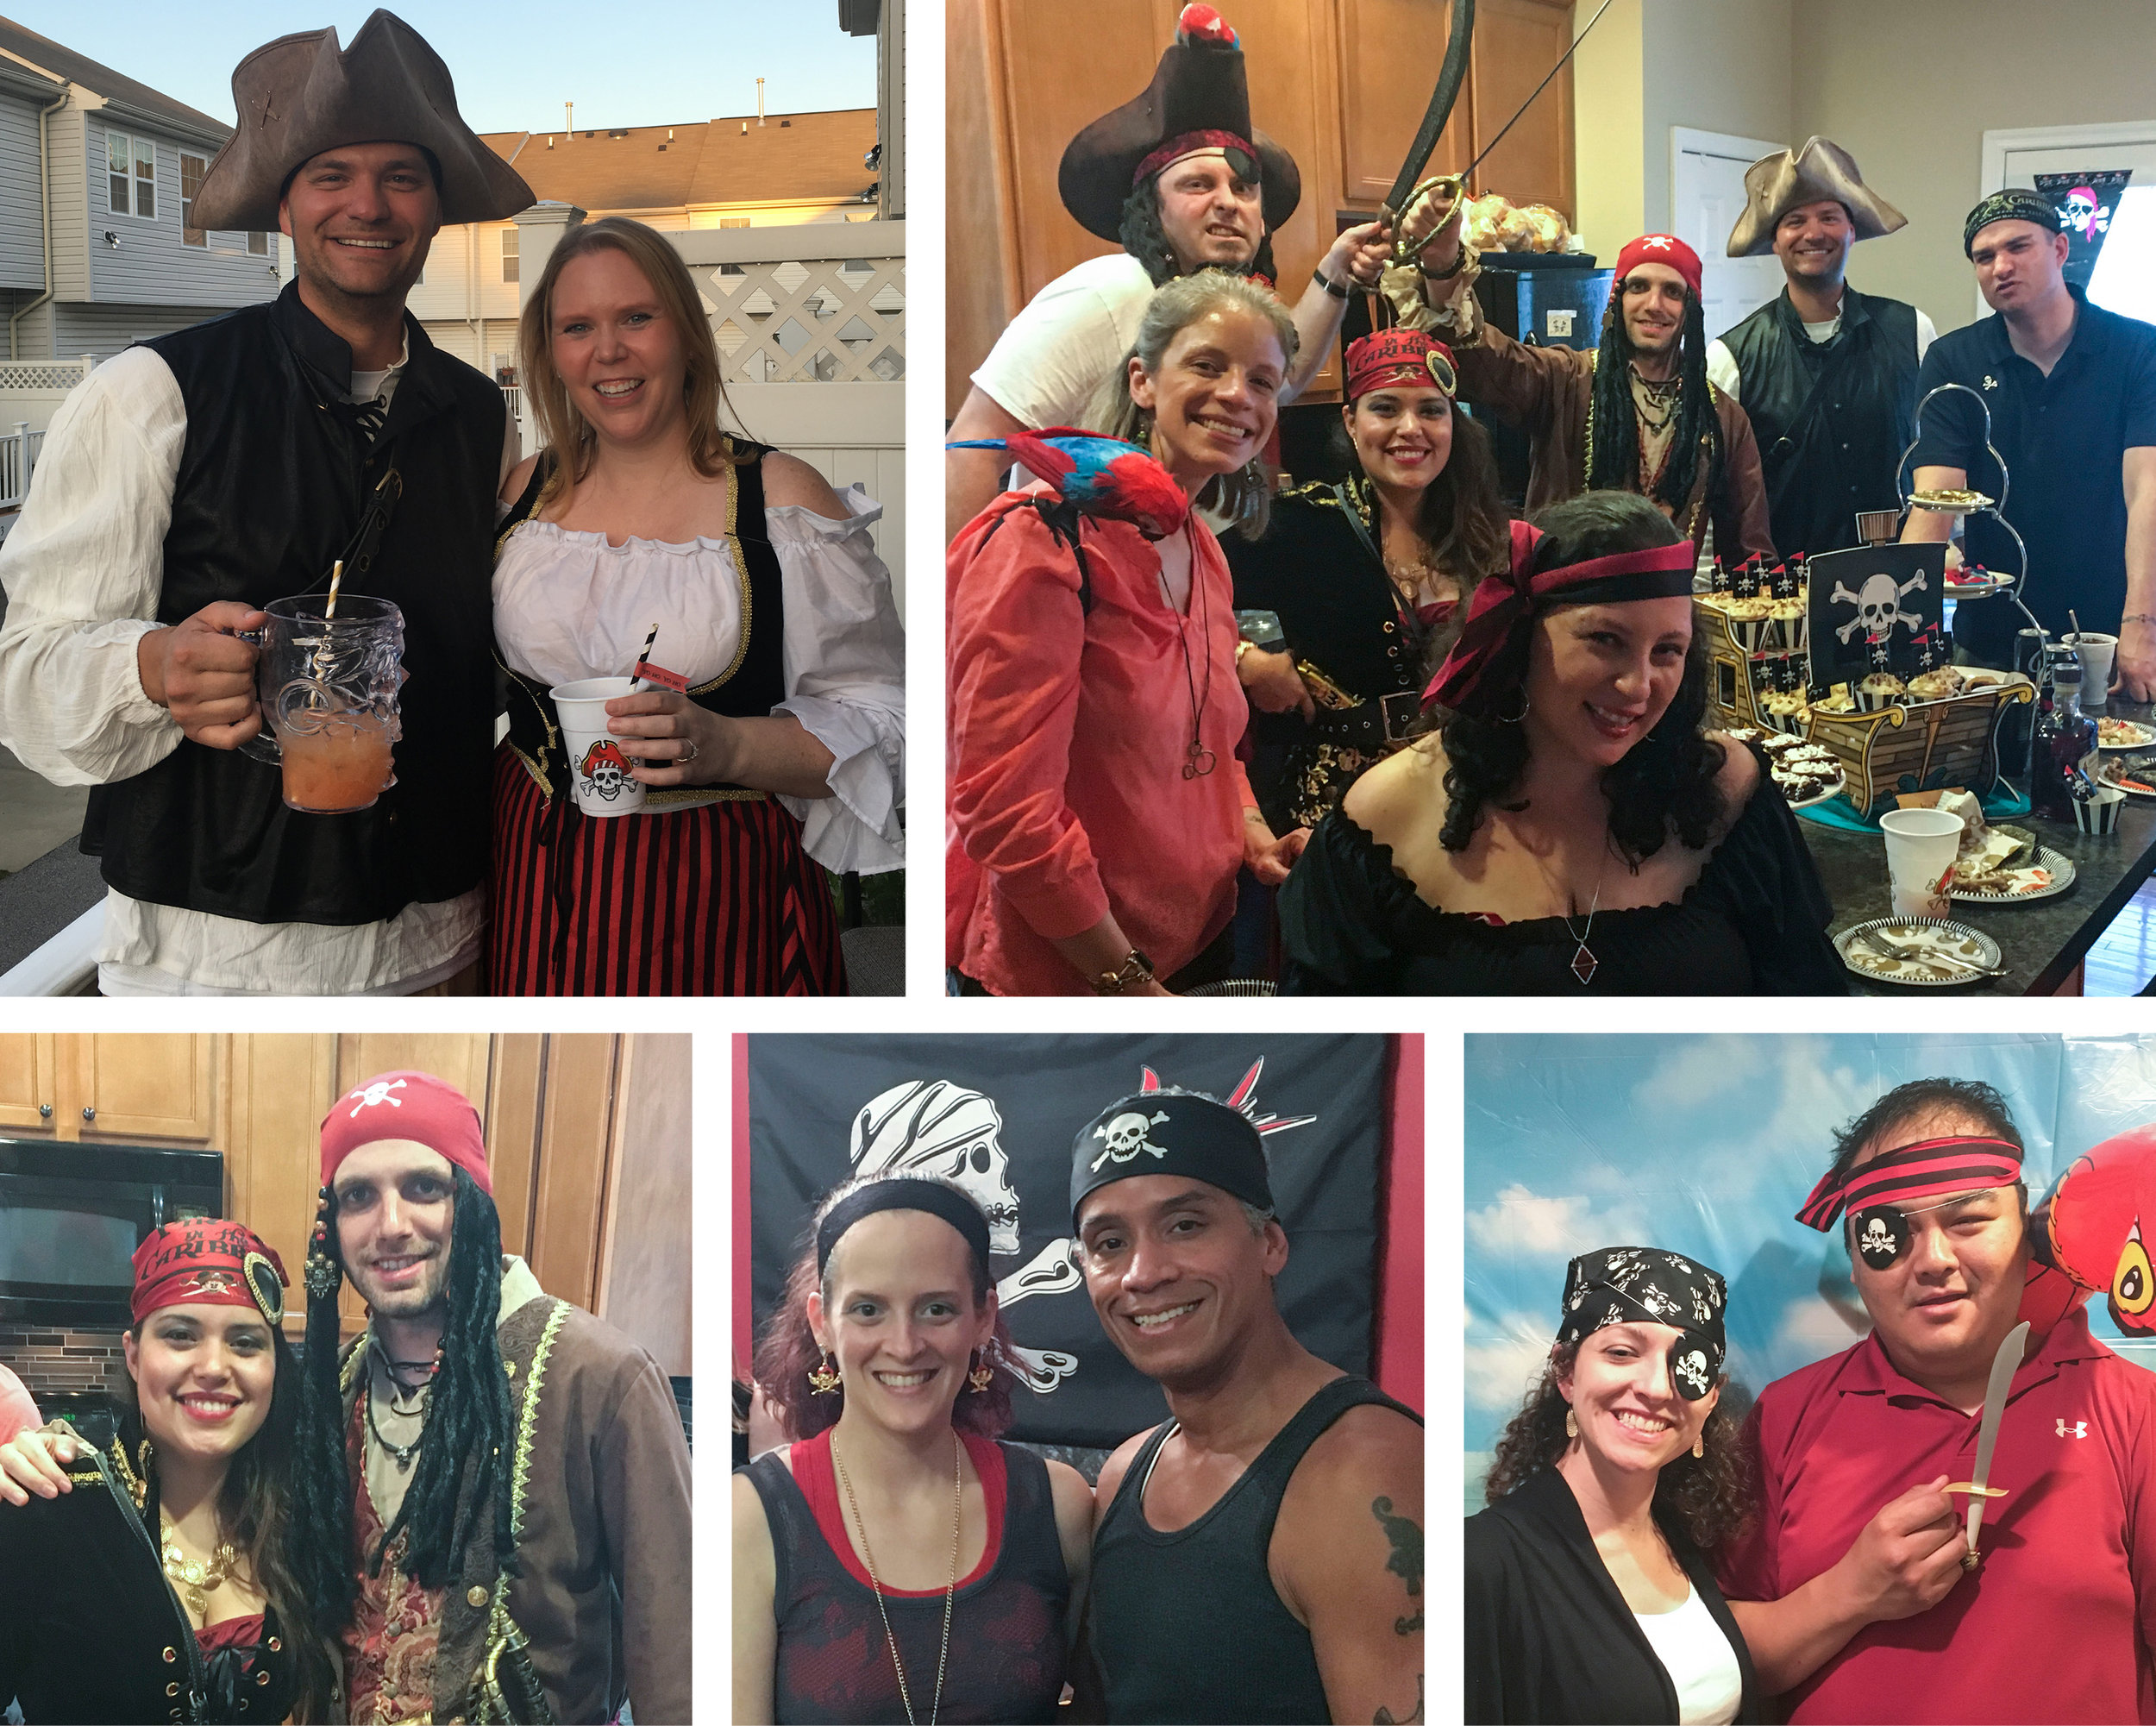 A Pirate's Life for Me: How to Party like Jack Sparrow